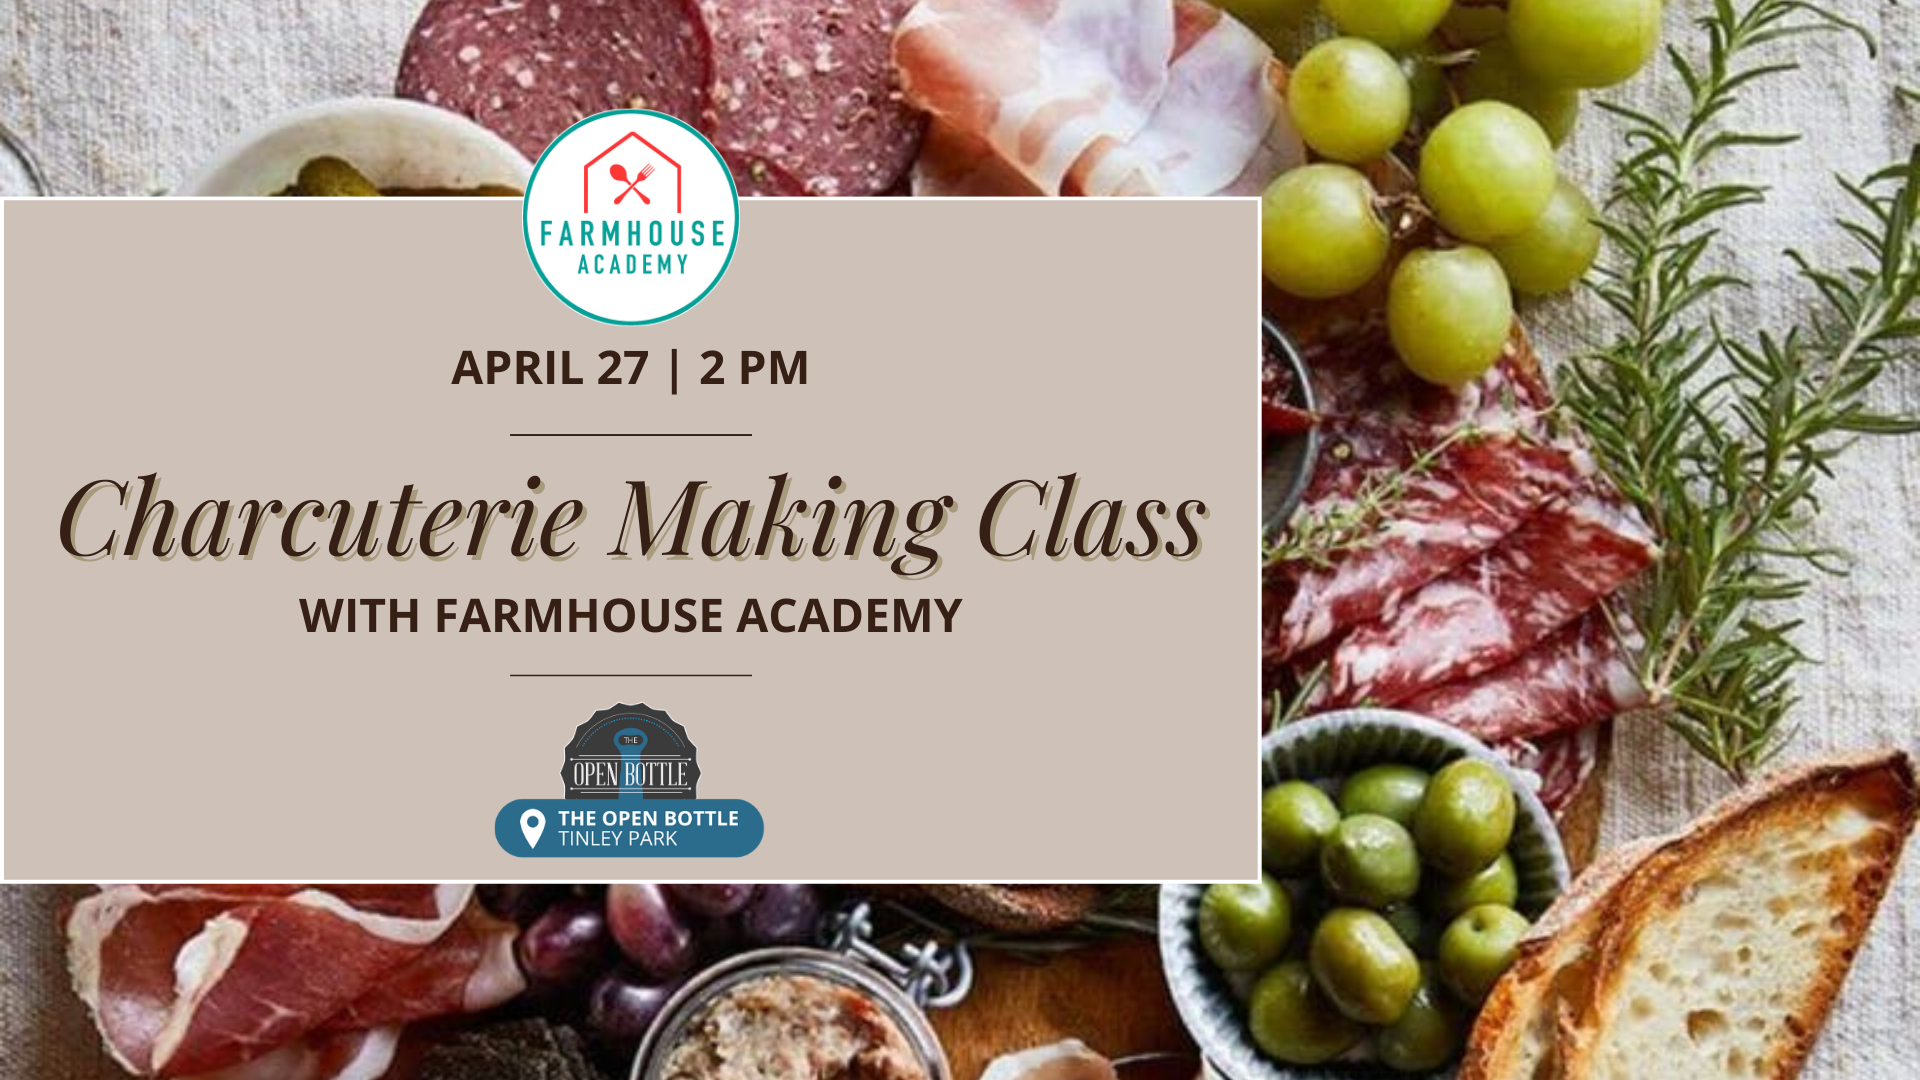 Event: Charcuterie Making Class with Farmhouse Academy